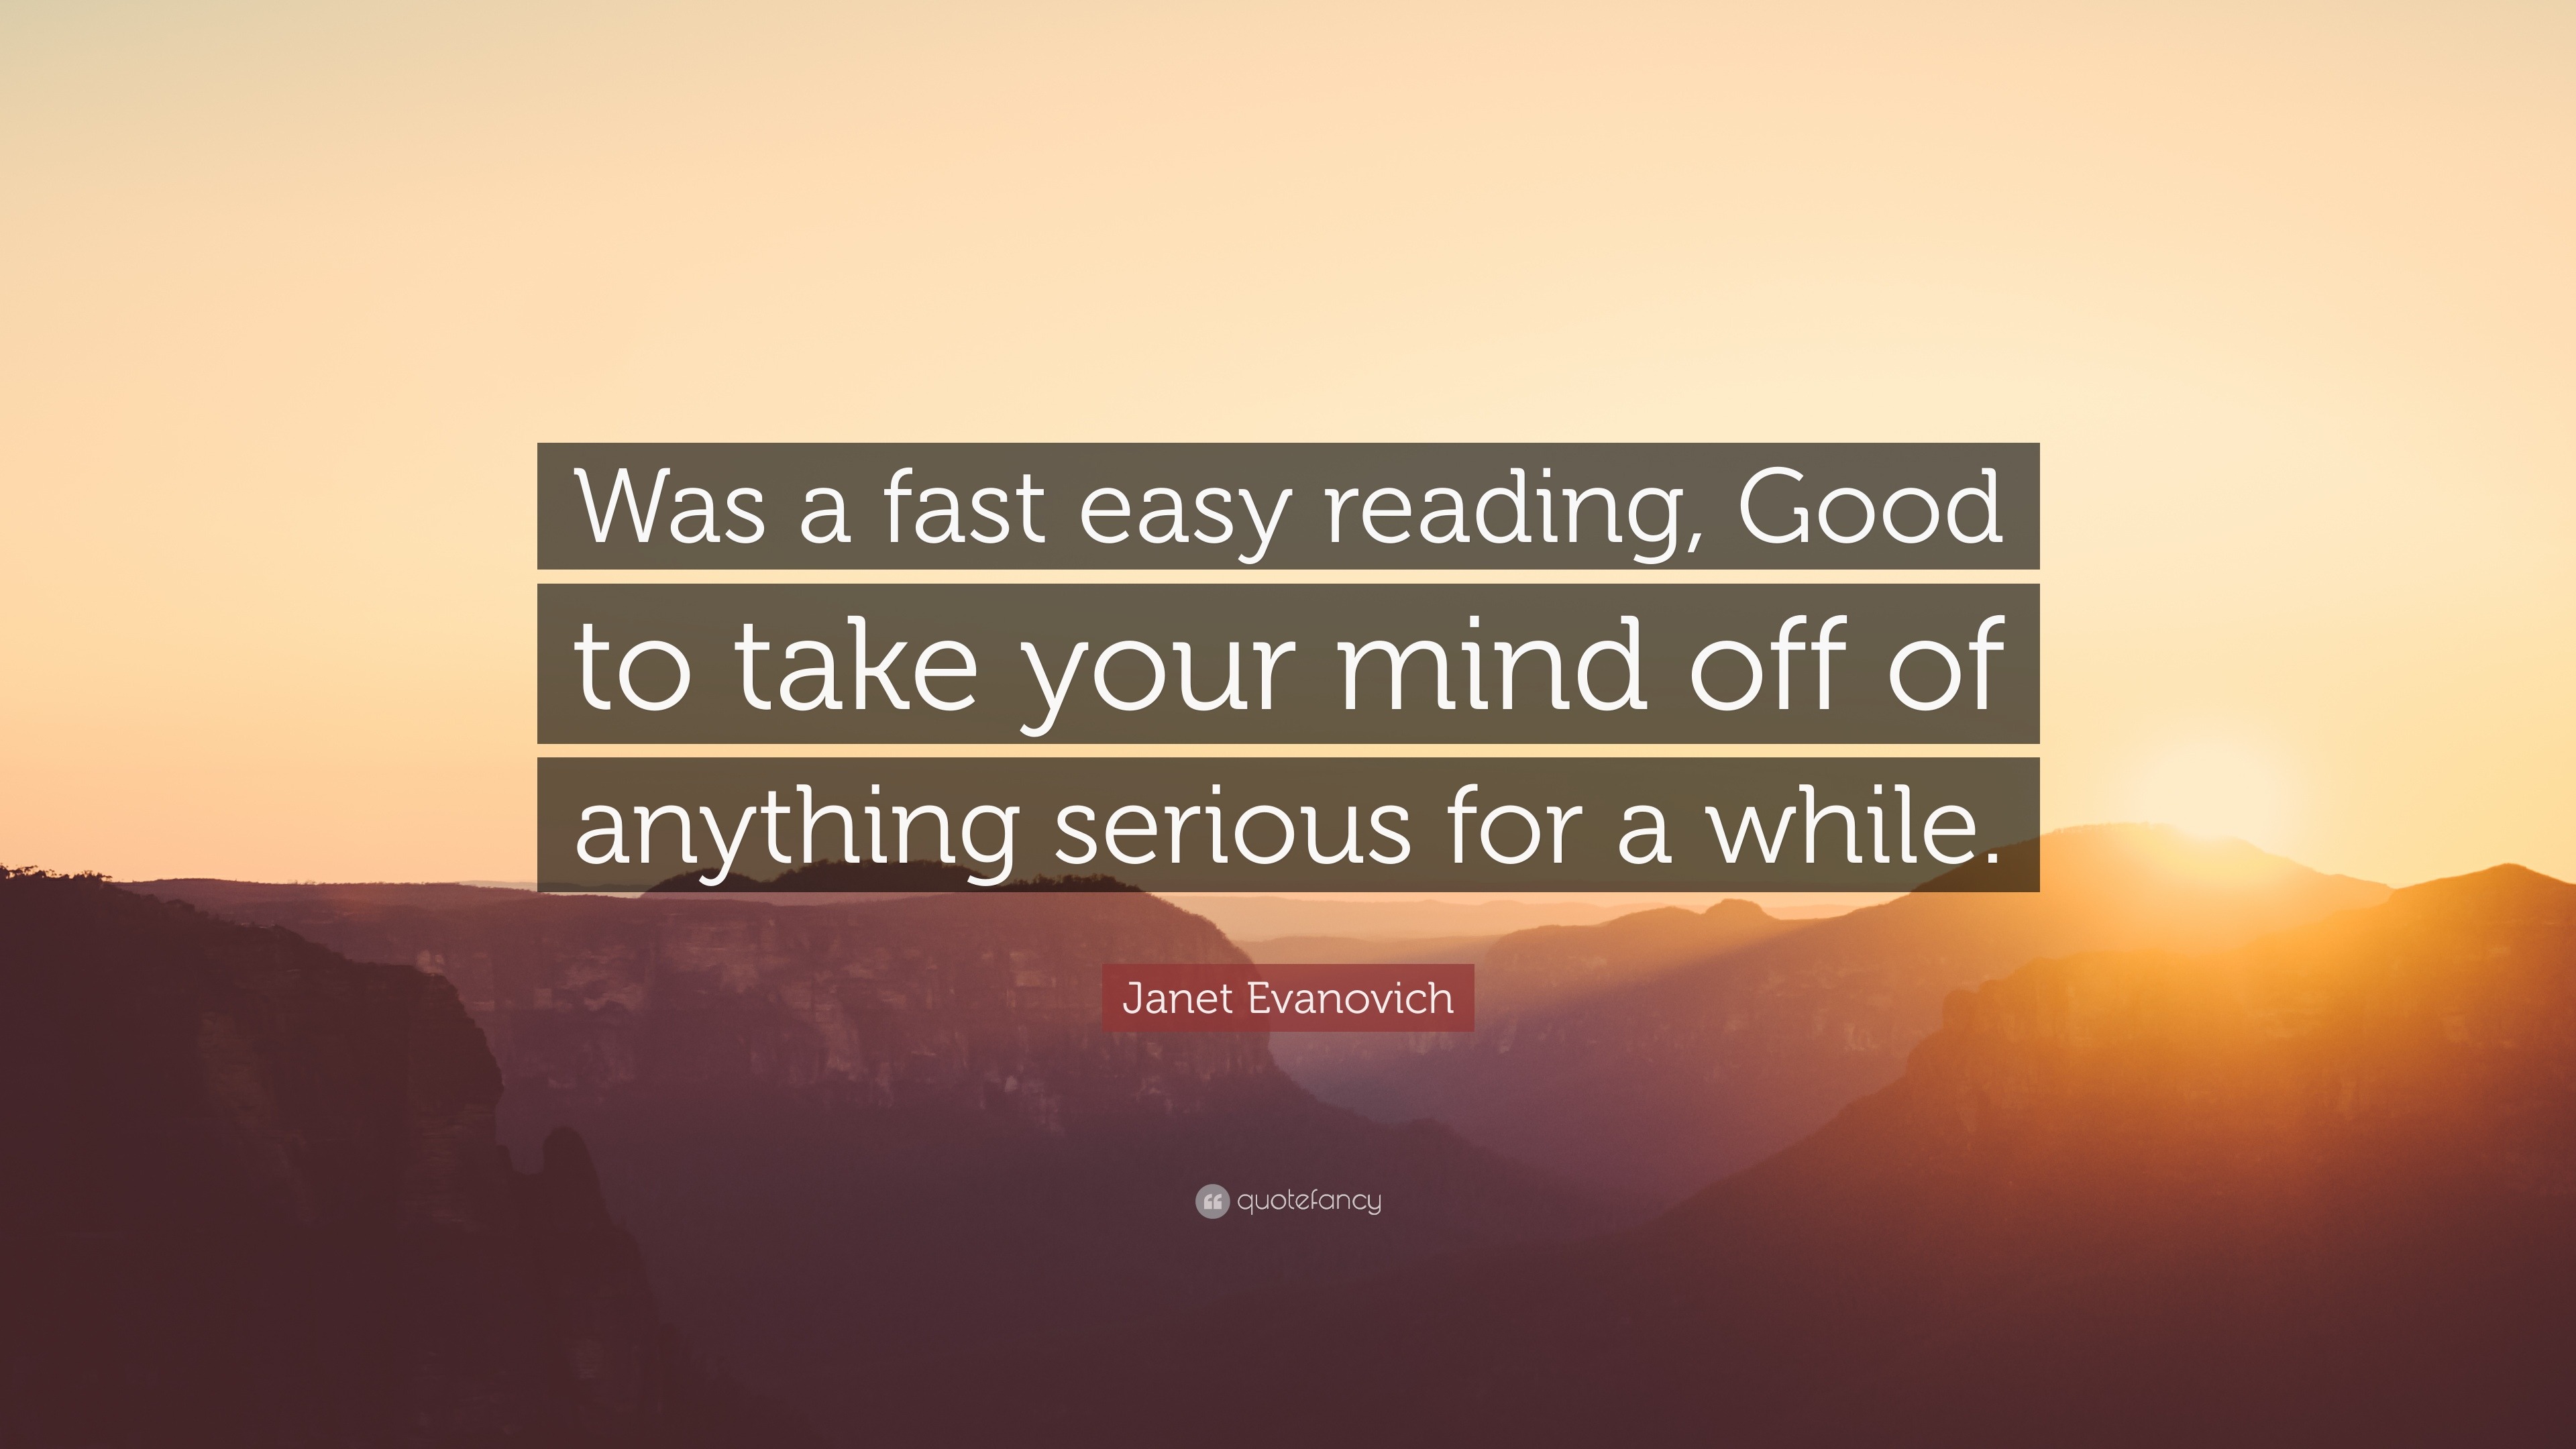 Janet Evanovich Quote “was A Fast Easy Reading Good To Take Your Mind